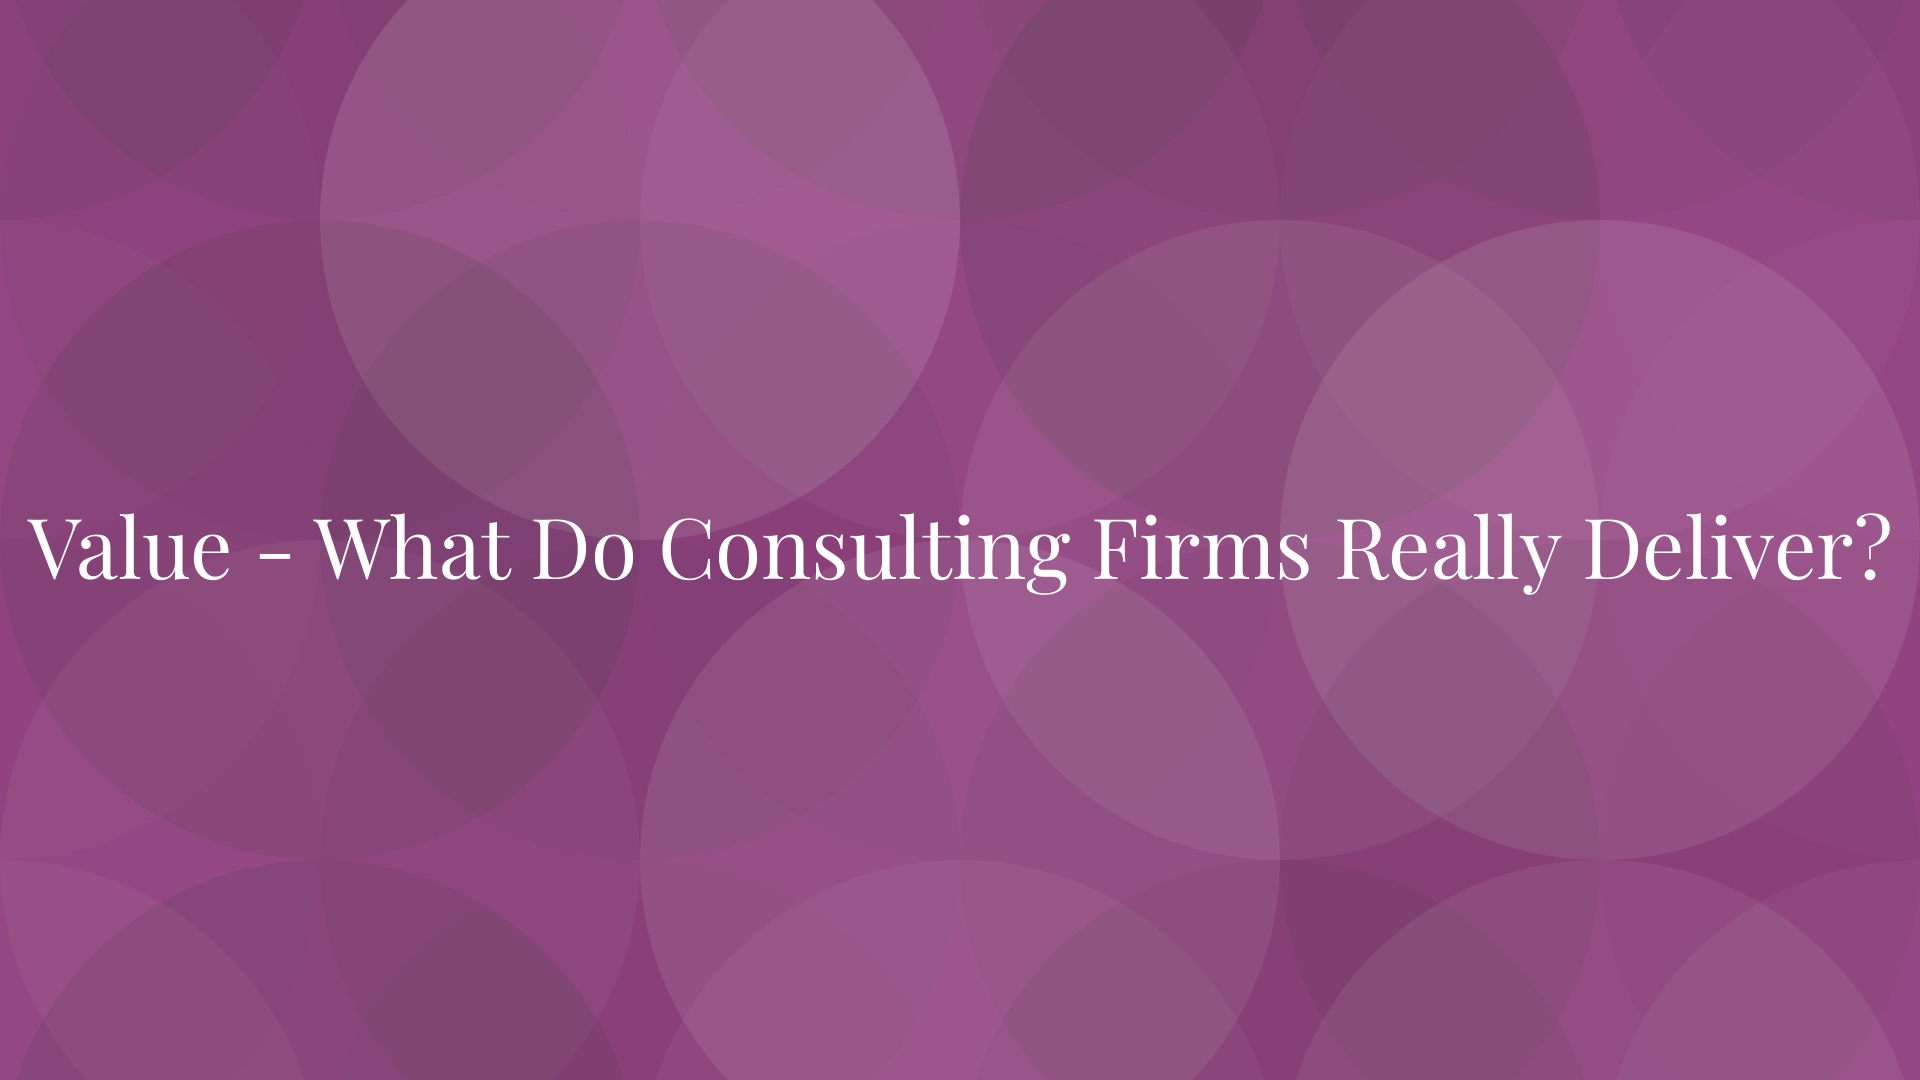 Value - What Do Consulting Firms Really Deliver?